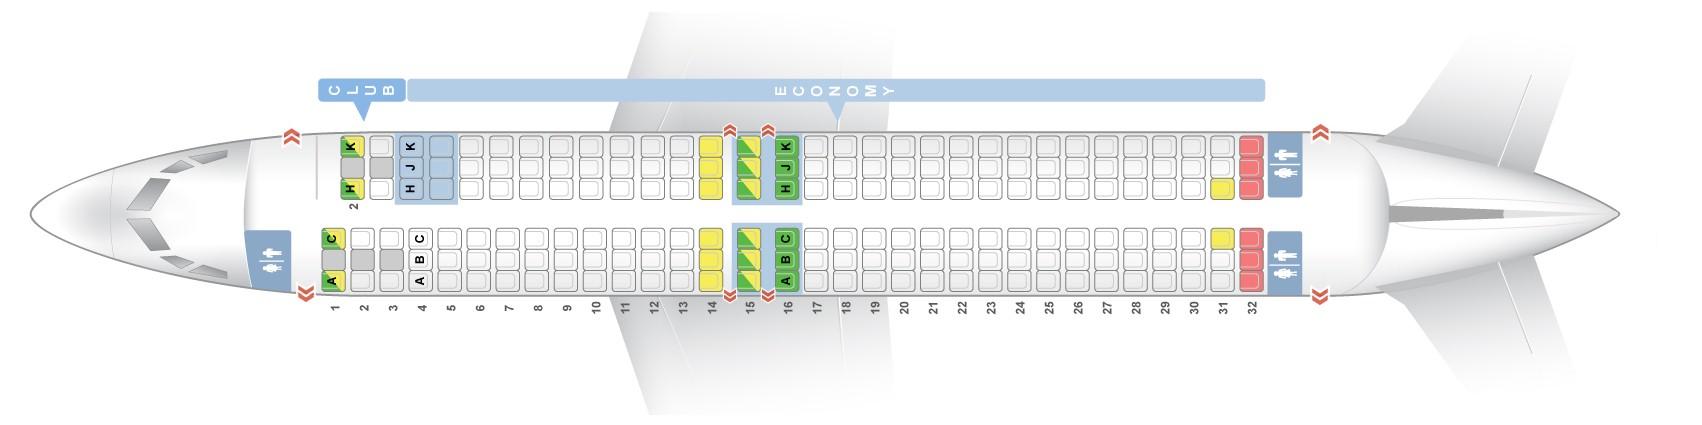 Seat Map Boeing 737 800 Air Transat Best Seats In The Plane